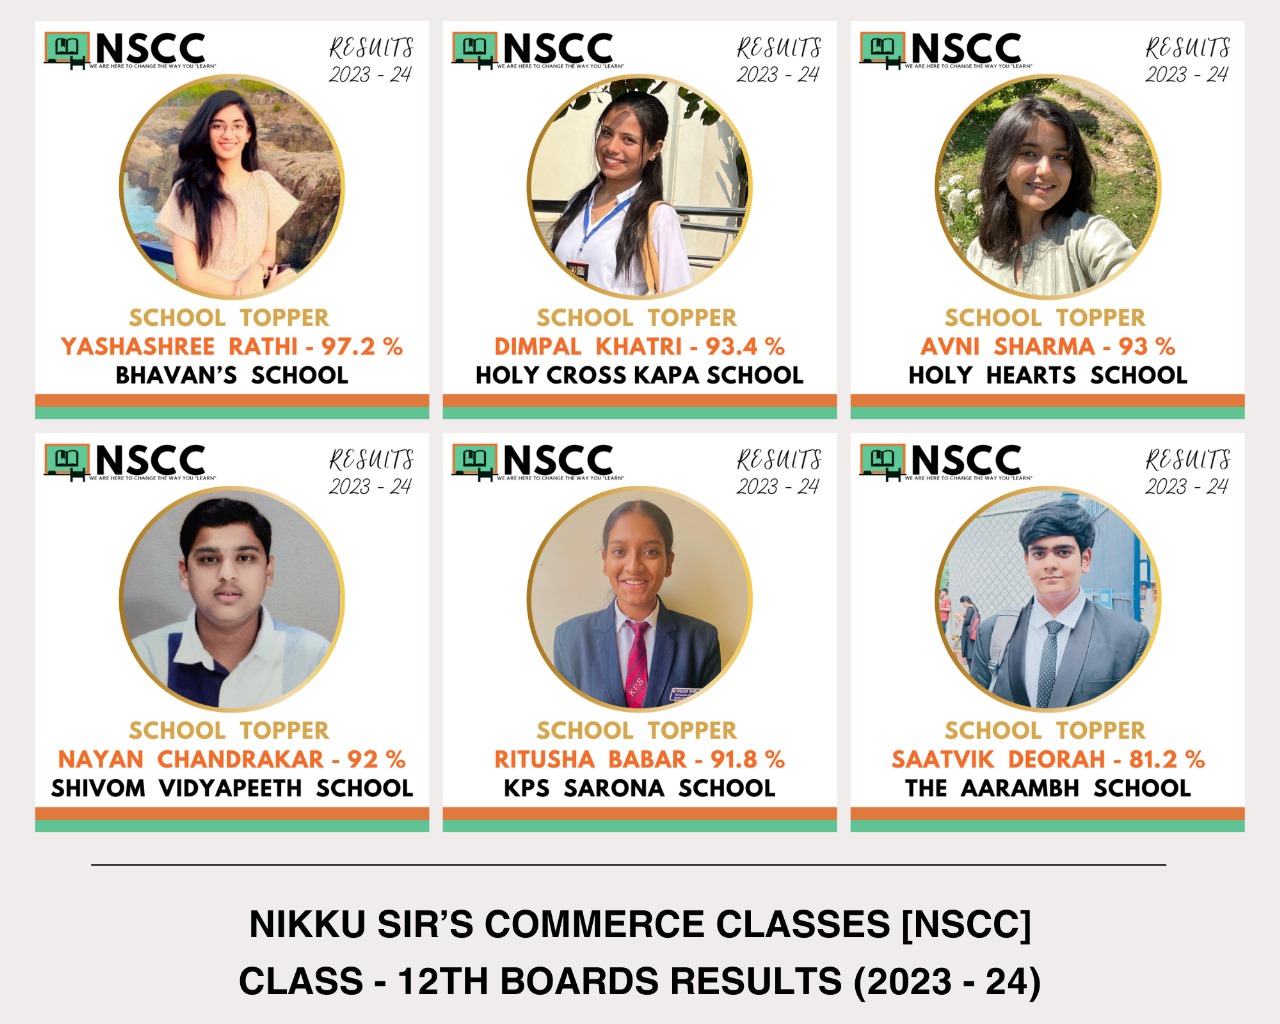 Nikku Sir's Commerce Classes ,NSCC has once again cemented its reputation as a premier coaching institute, Nikku Sir's Commerce Classes,founder, Narender Singh Gill, Accountancy, Economics and Business Studies, toppers, two branches in Raipur 1. Near Anupam Garden, HDFC Bank Building, First Floor, GE Road; 2. Near Jagannath Temple, Gaytri nagar, Meenakshi Enclave,raipur, chhattisgarh, Website link : https://nscc.co.in/, khabargali